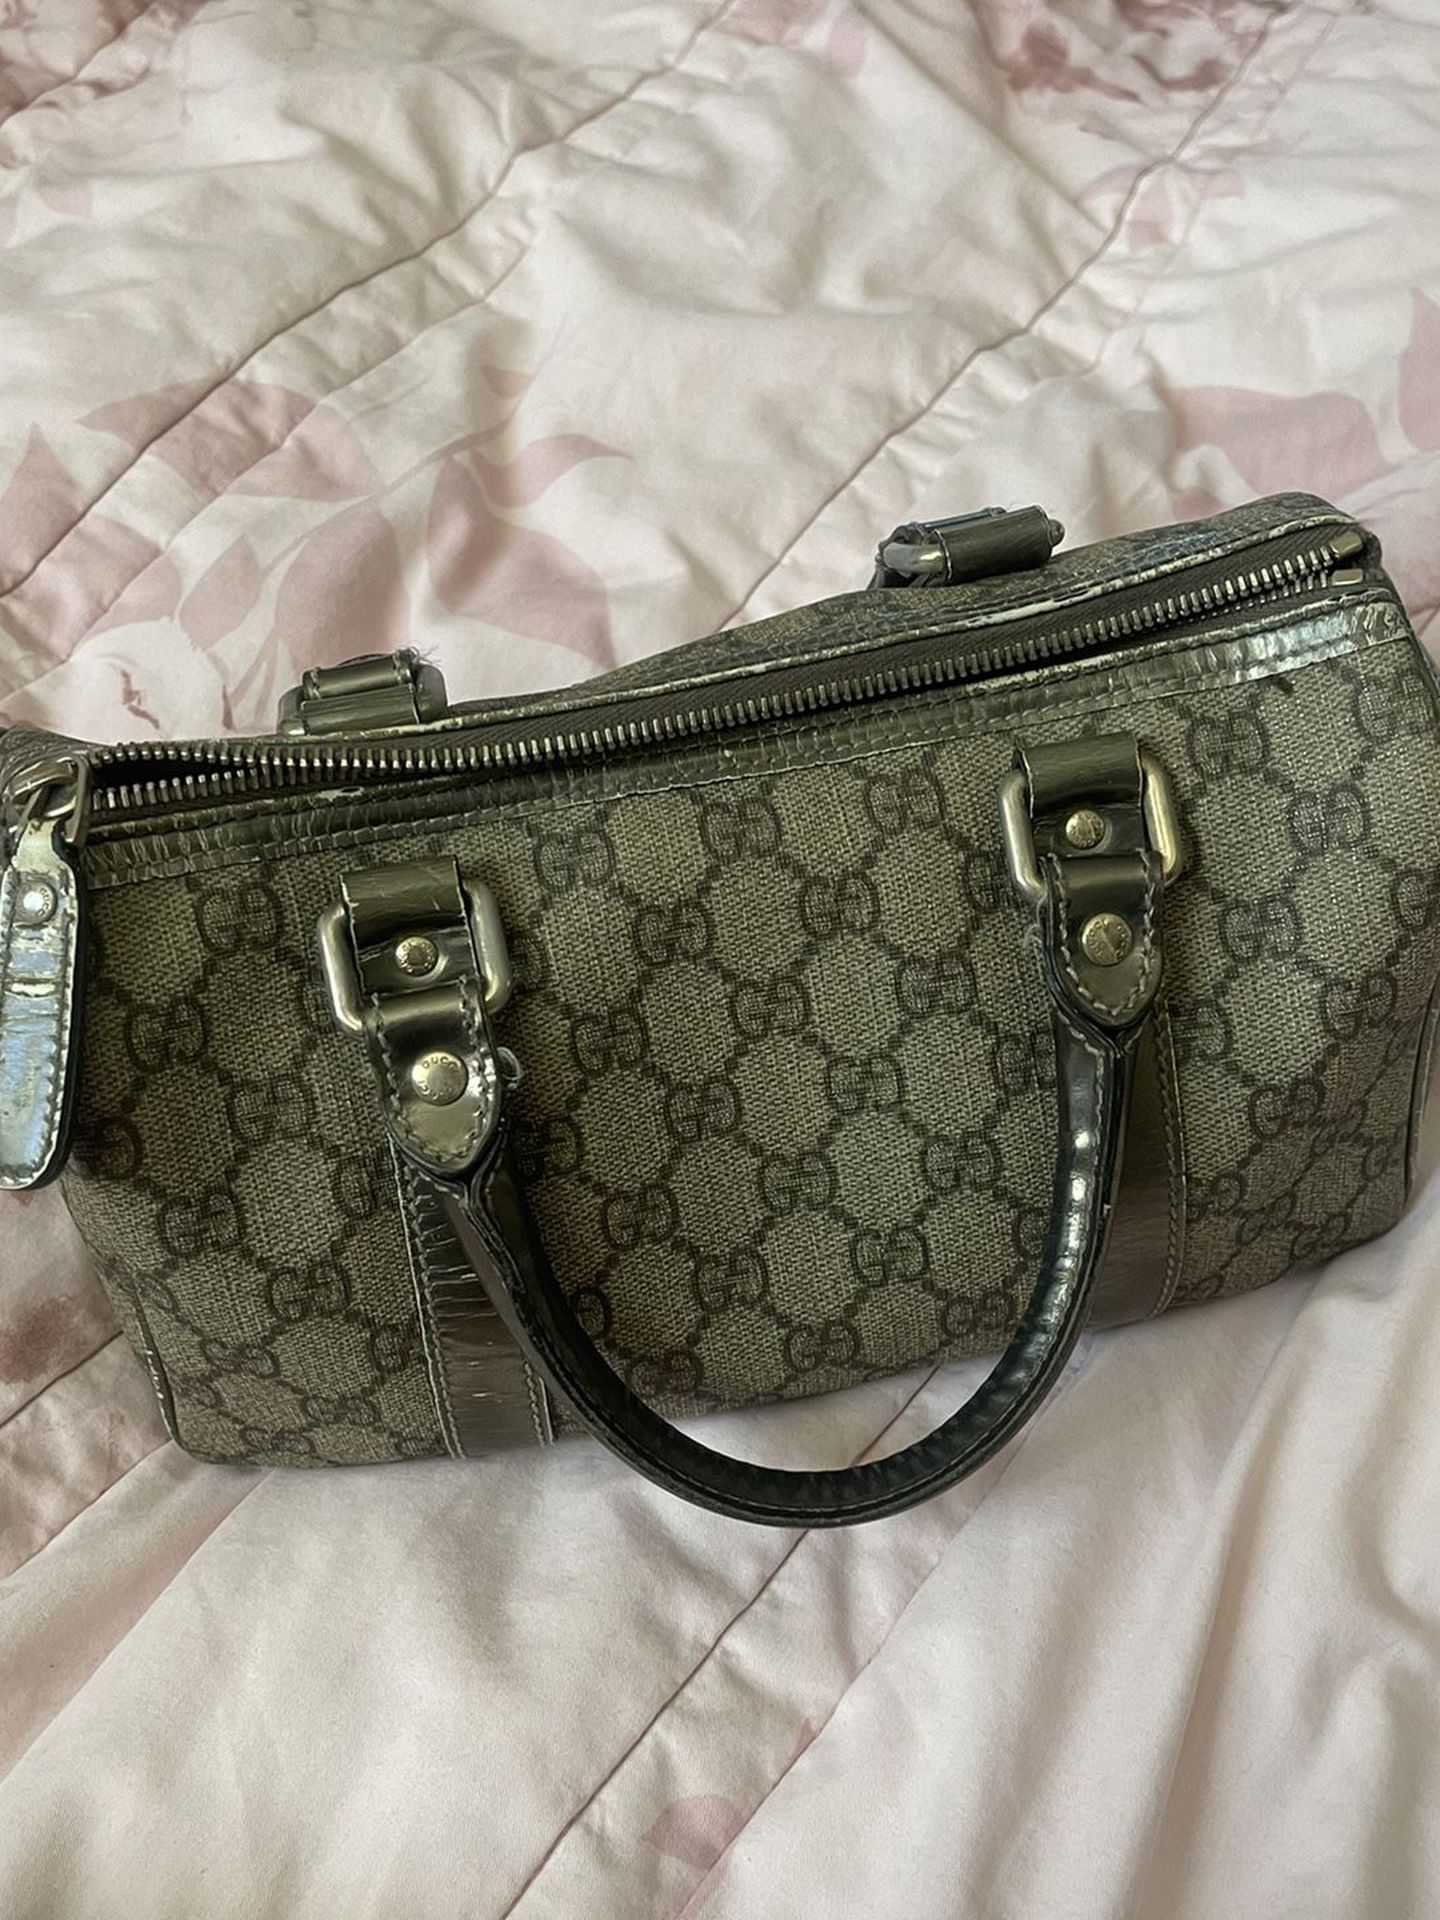 Gucci small hand bag authentic